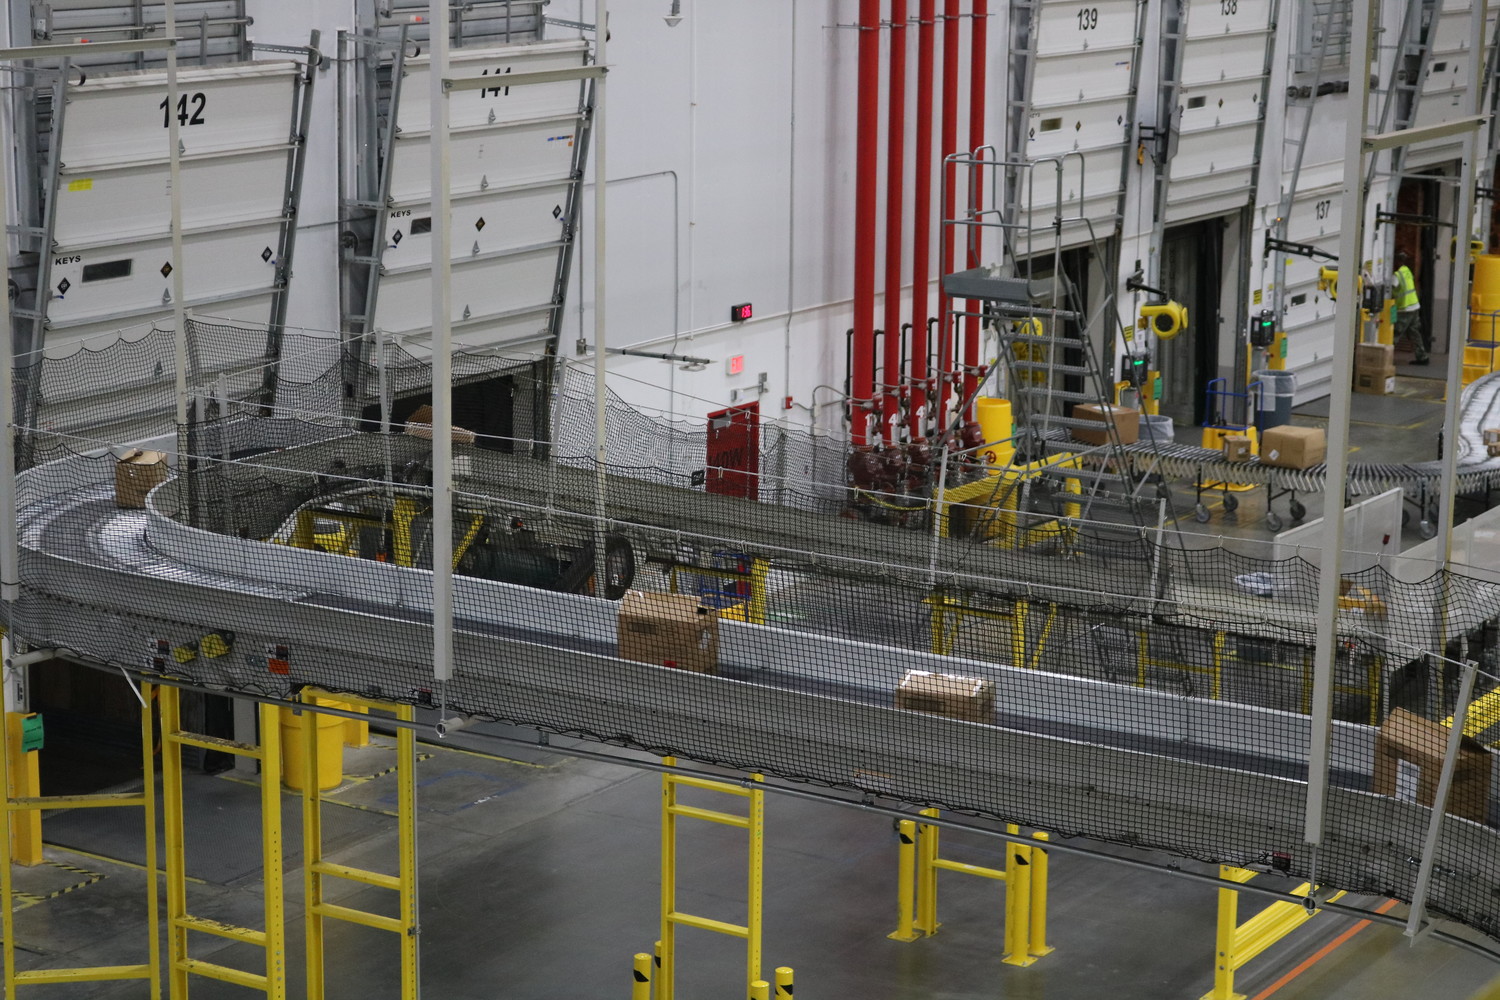 Conveyor belts move packages to a shipping area at the new Amazon facility.